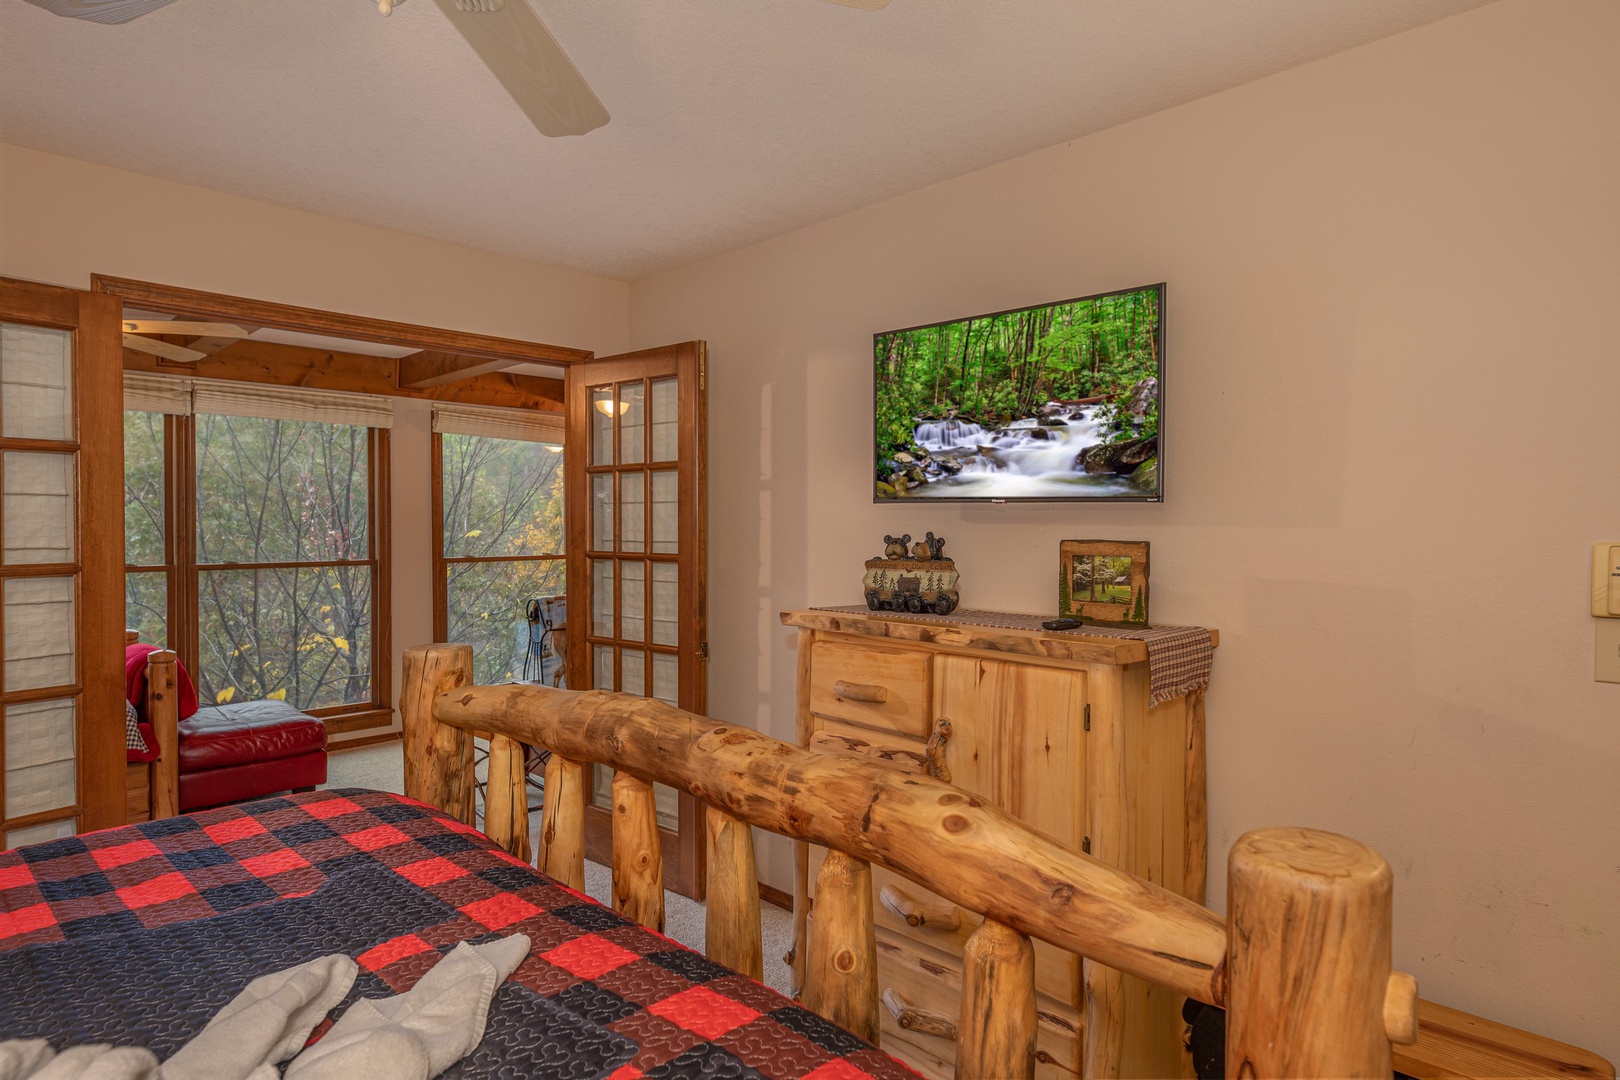 Dresser and TV in a bedroom at Lazy Bear Retreat, a 4 bedroom cabin rental located in Pigeon Forge